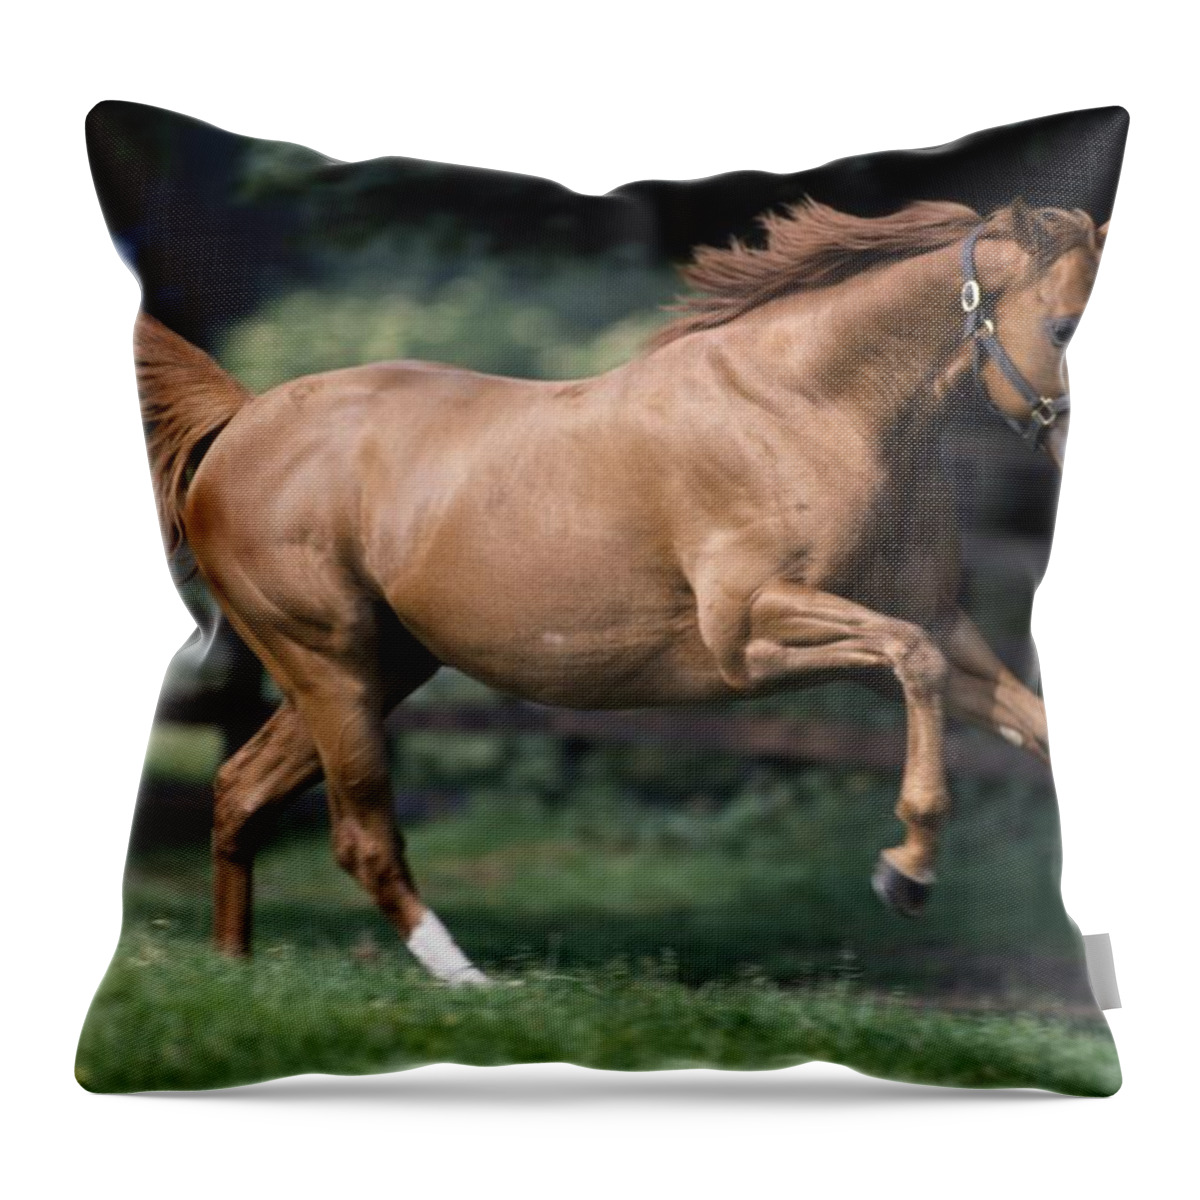 Horse Throw Pillow featuring the photograph Galloping Thoroughbred Horse by The Irish Image Collection 